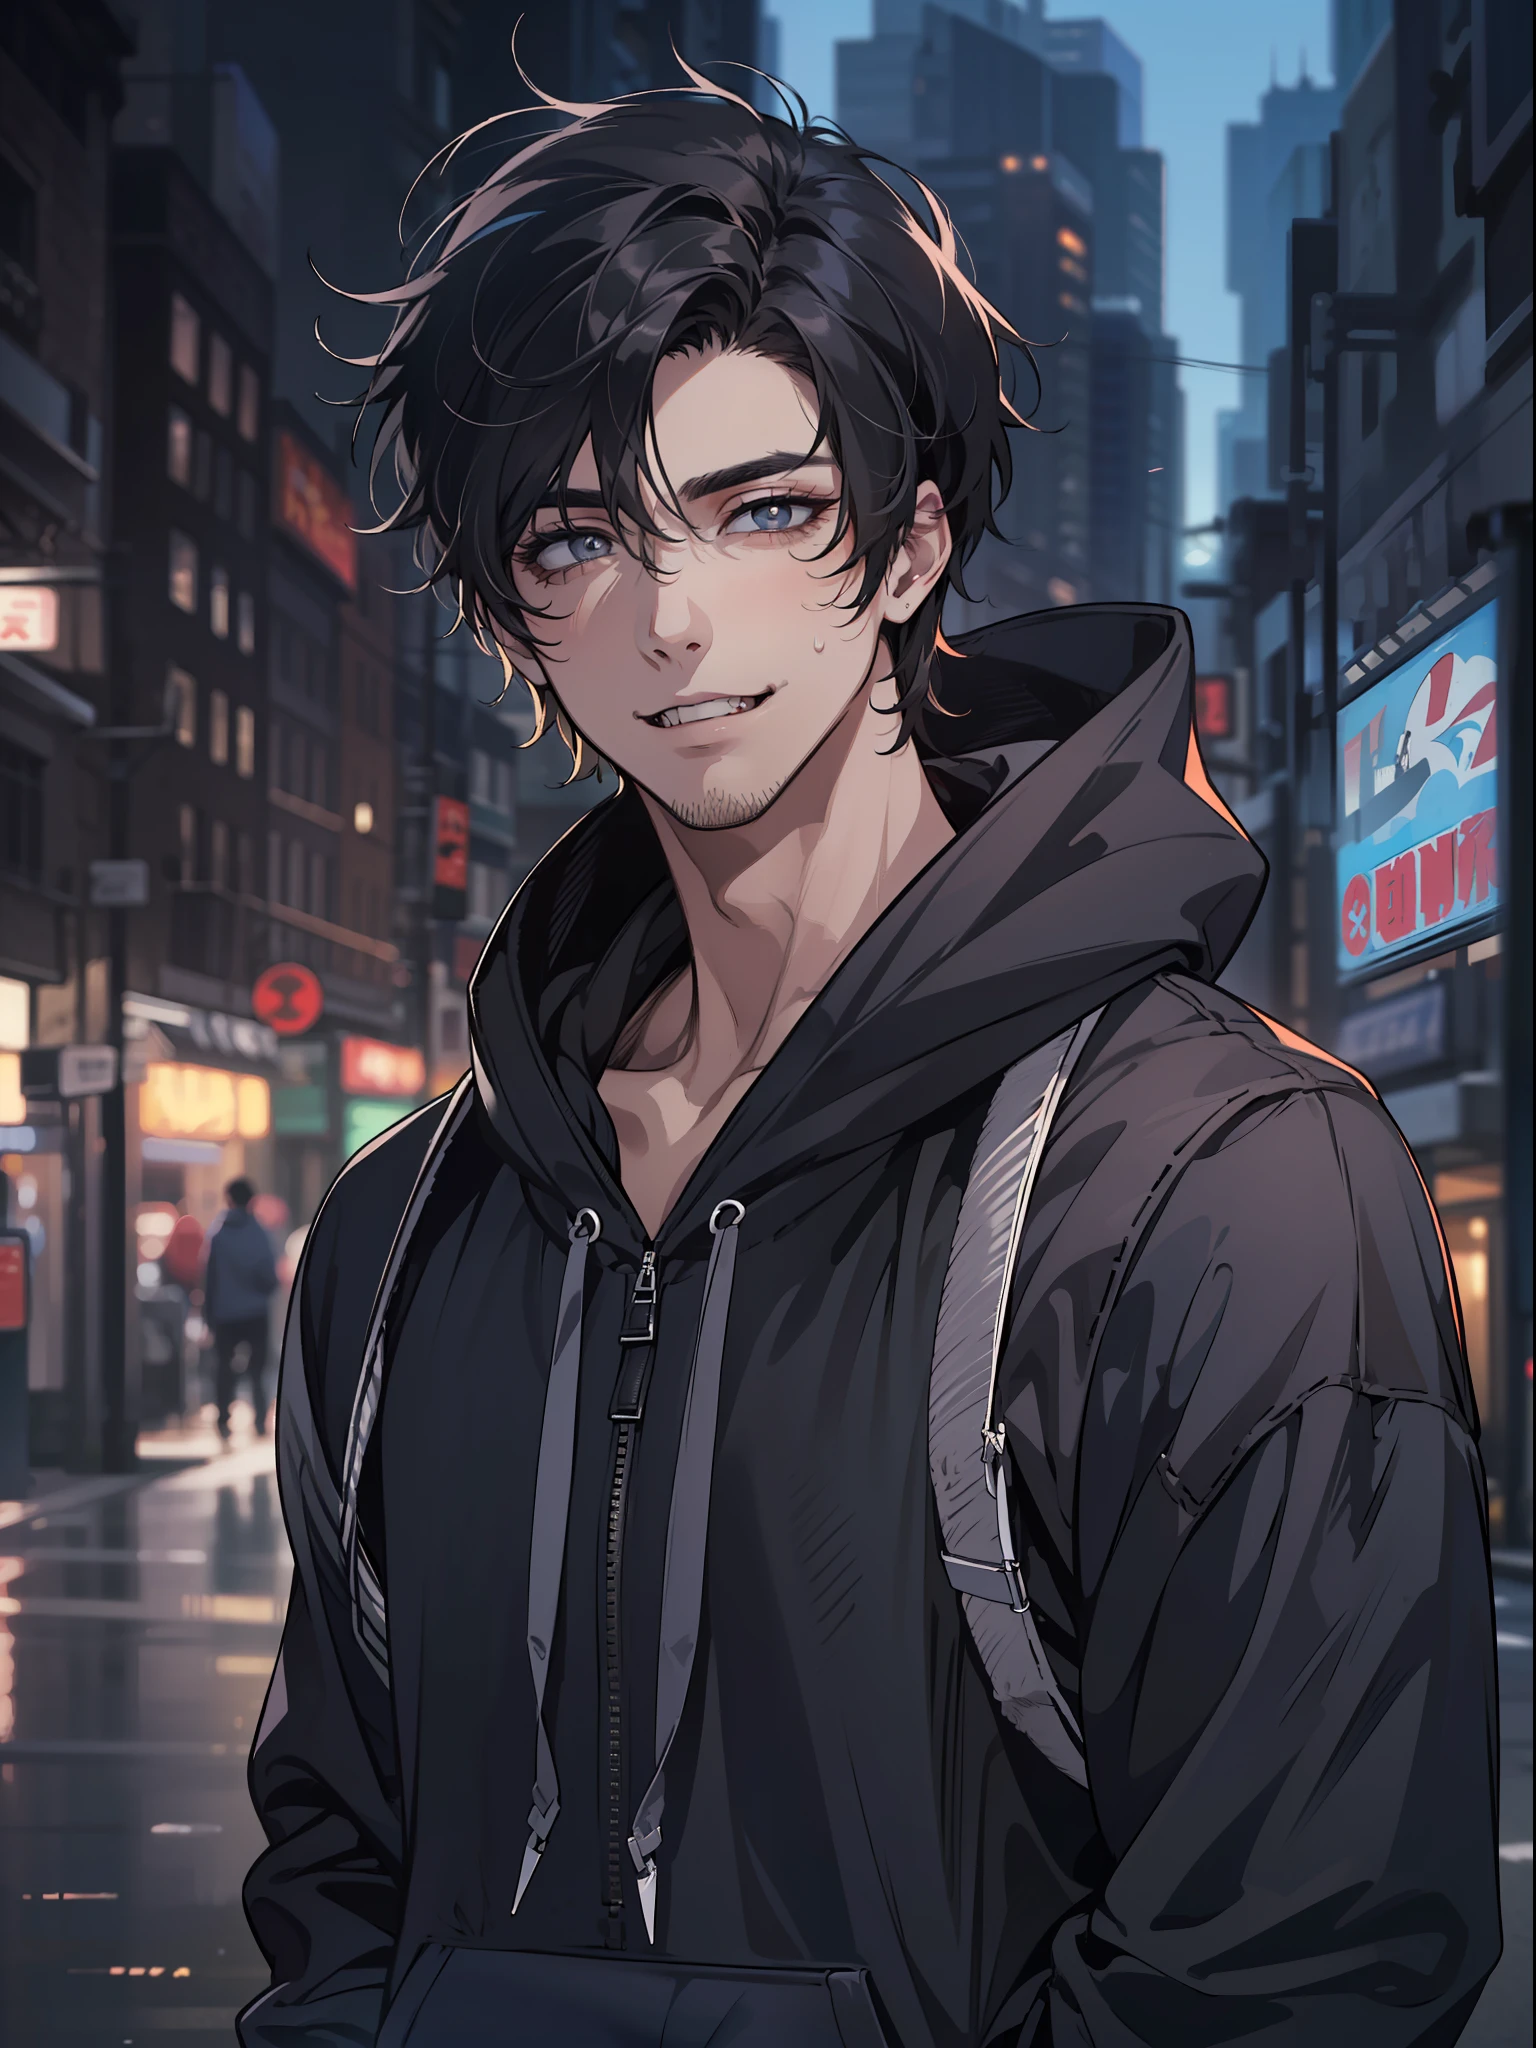 ((highest quality, masterpiece, 4k, finely detailed, detailed eyes, detailed face, gelbooru, pixiv)), ((solo)), 1 male, (handsome, masculine, adult male, broad shoulders), ((chin stubbles)), (smiling with fangs showing, looking at viewer), ((lazy eyes, tired eyes, half-lidded, eyebags under eyes, black eyes with white pupils)), ((dark hoodie, sweatpants)), ((black hair, medium length hair, shaggy hairstyle, messy hair)), (city background at night, standing with hands in hoodie pockets)